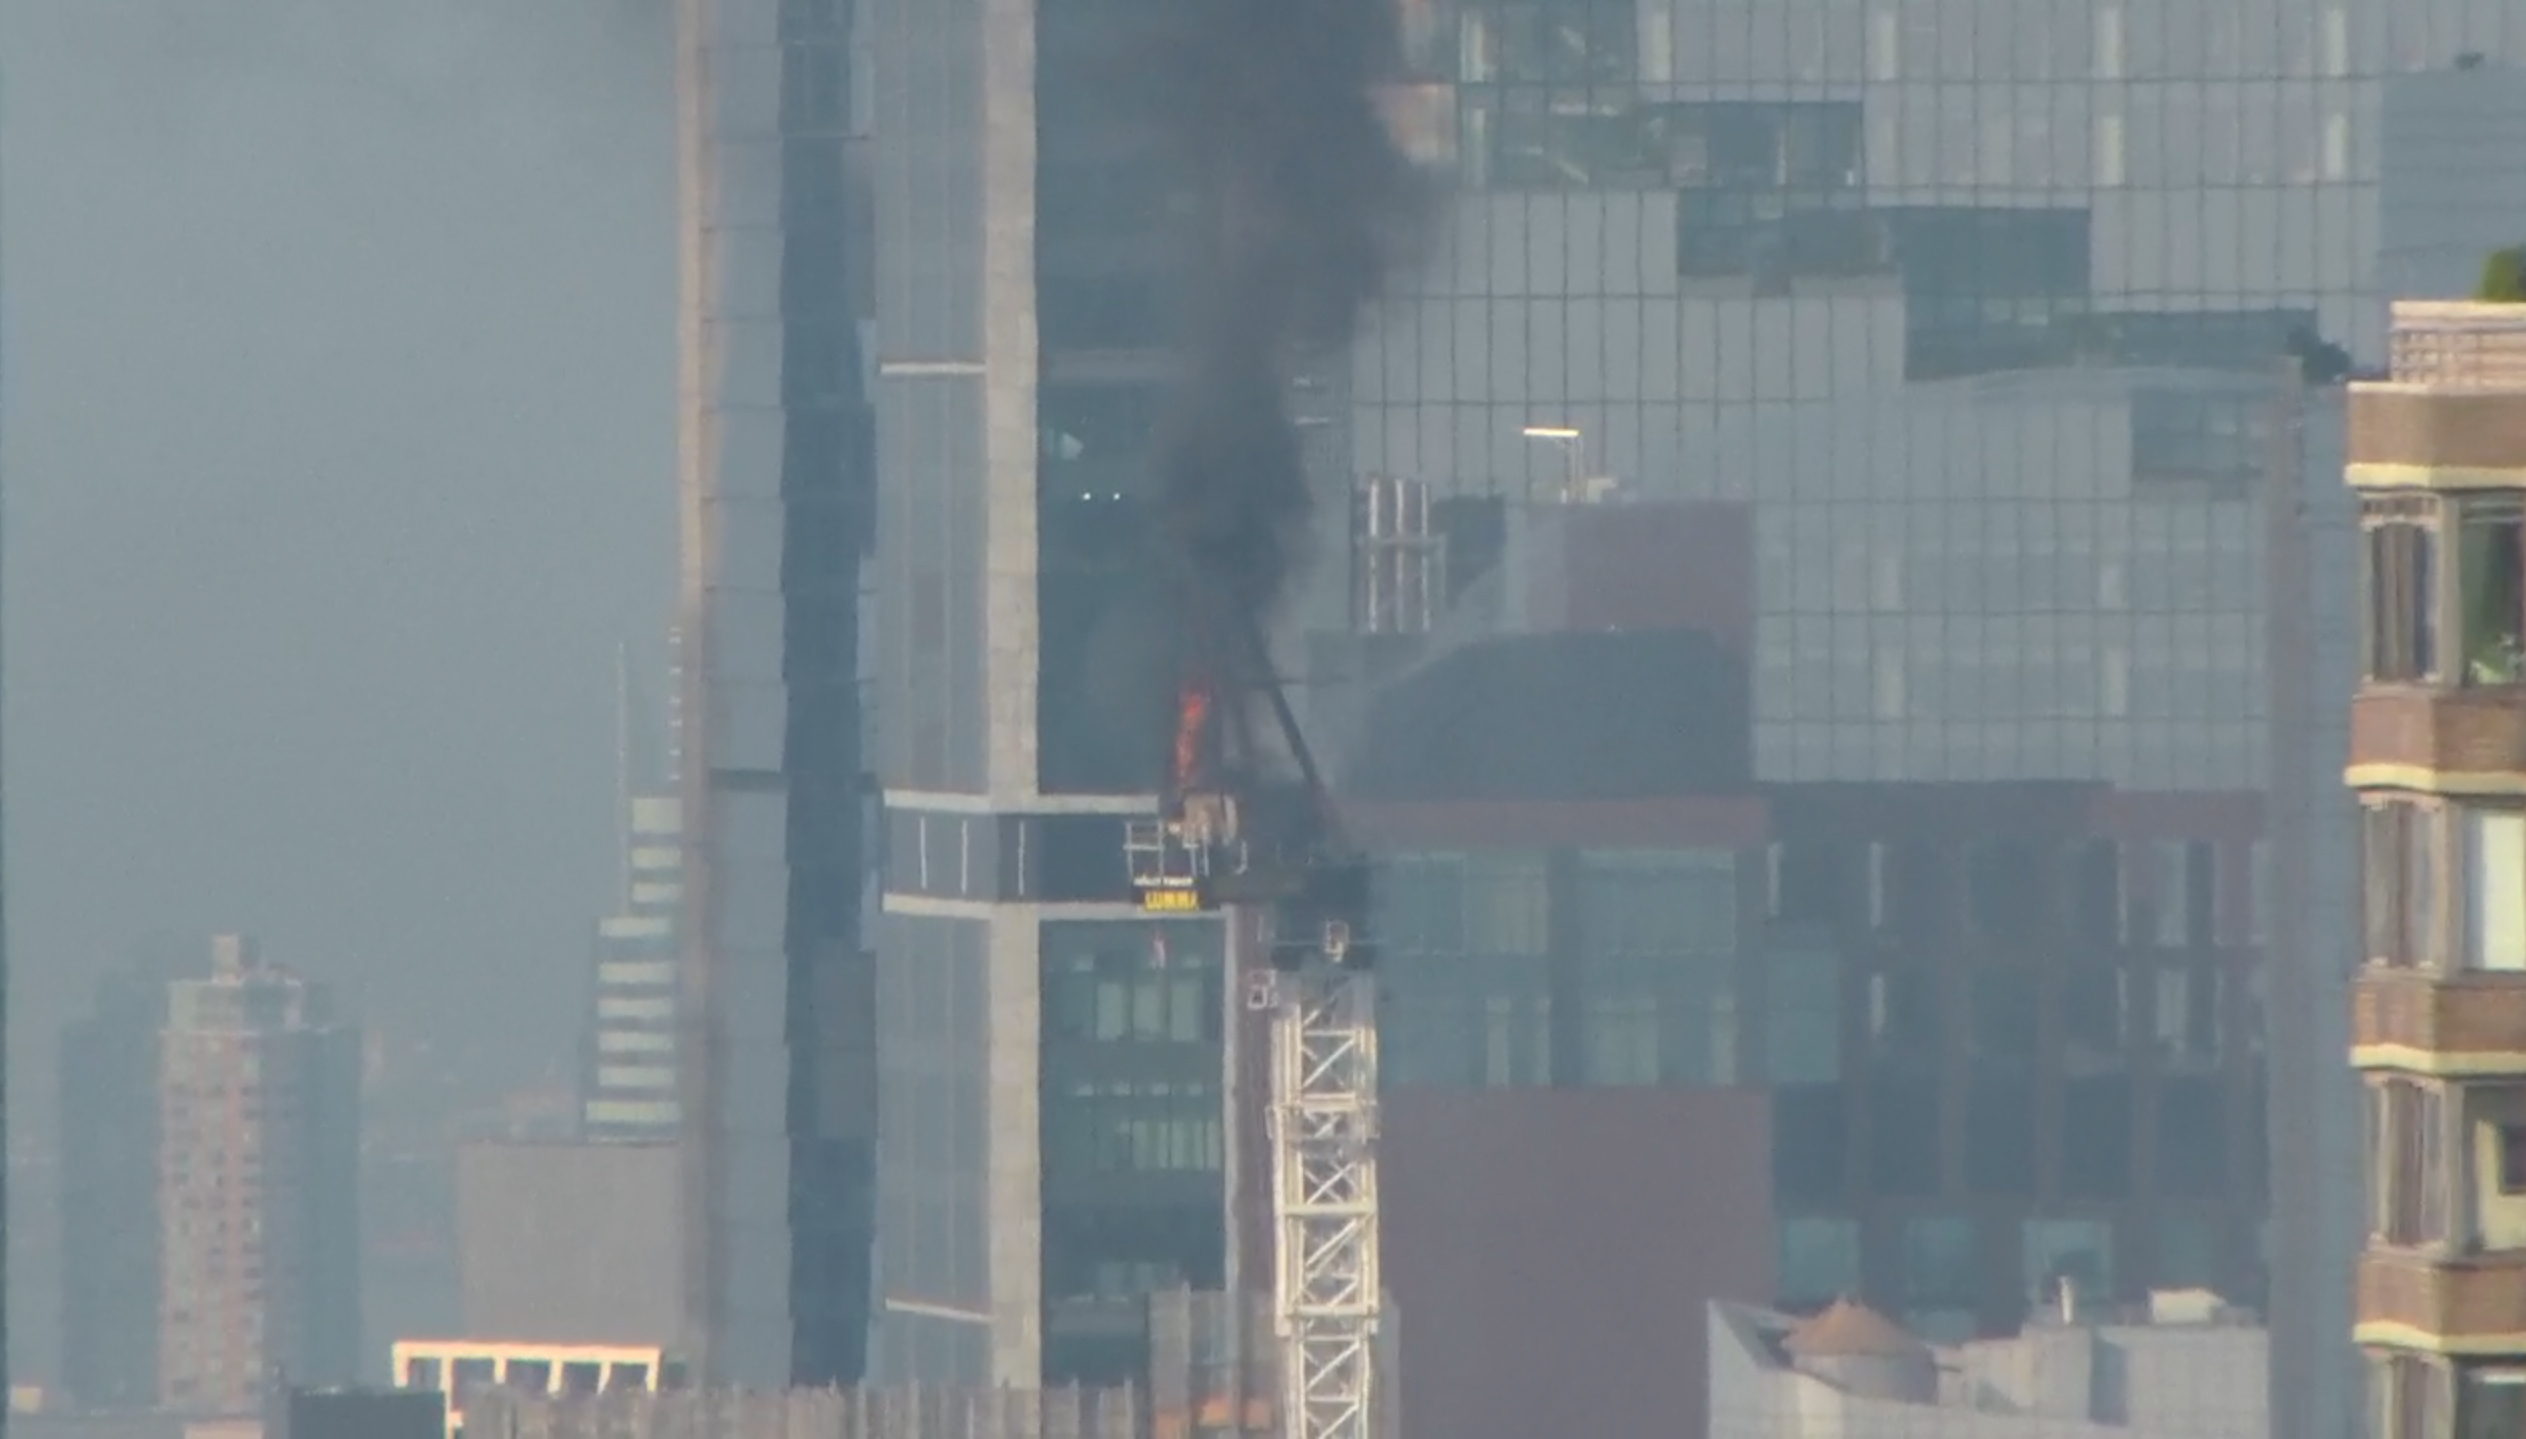 Emergency responders battle flames as a large construction crane caught fire in Manhattan on Wednes...